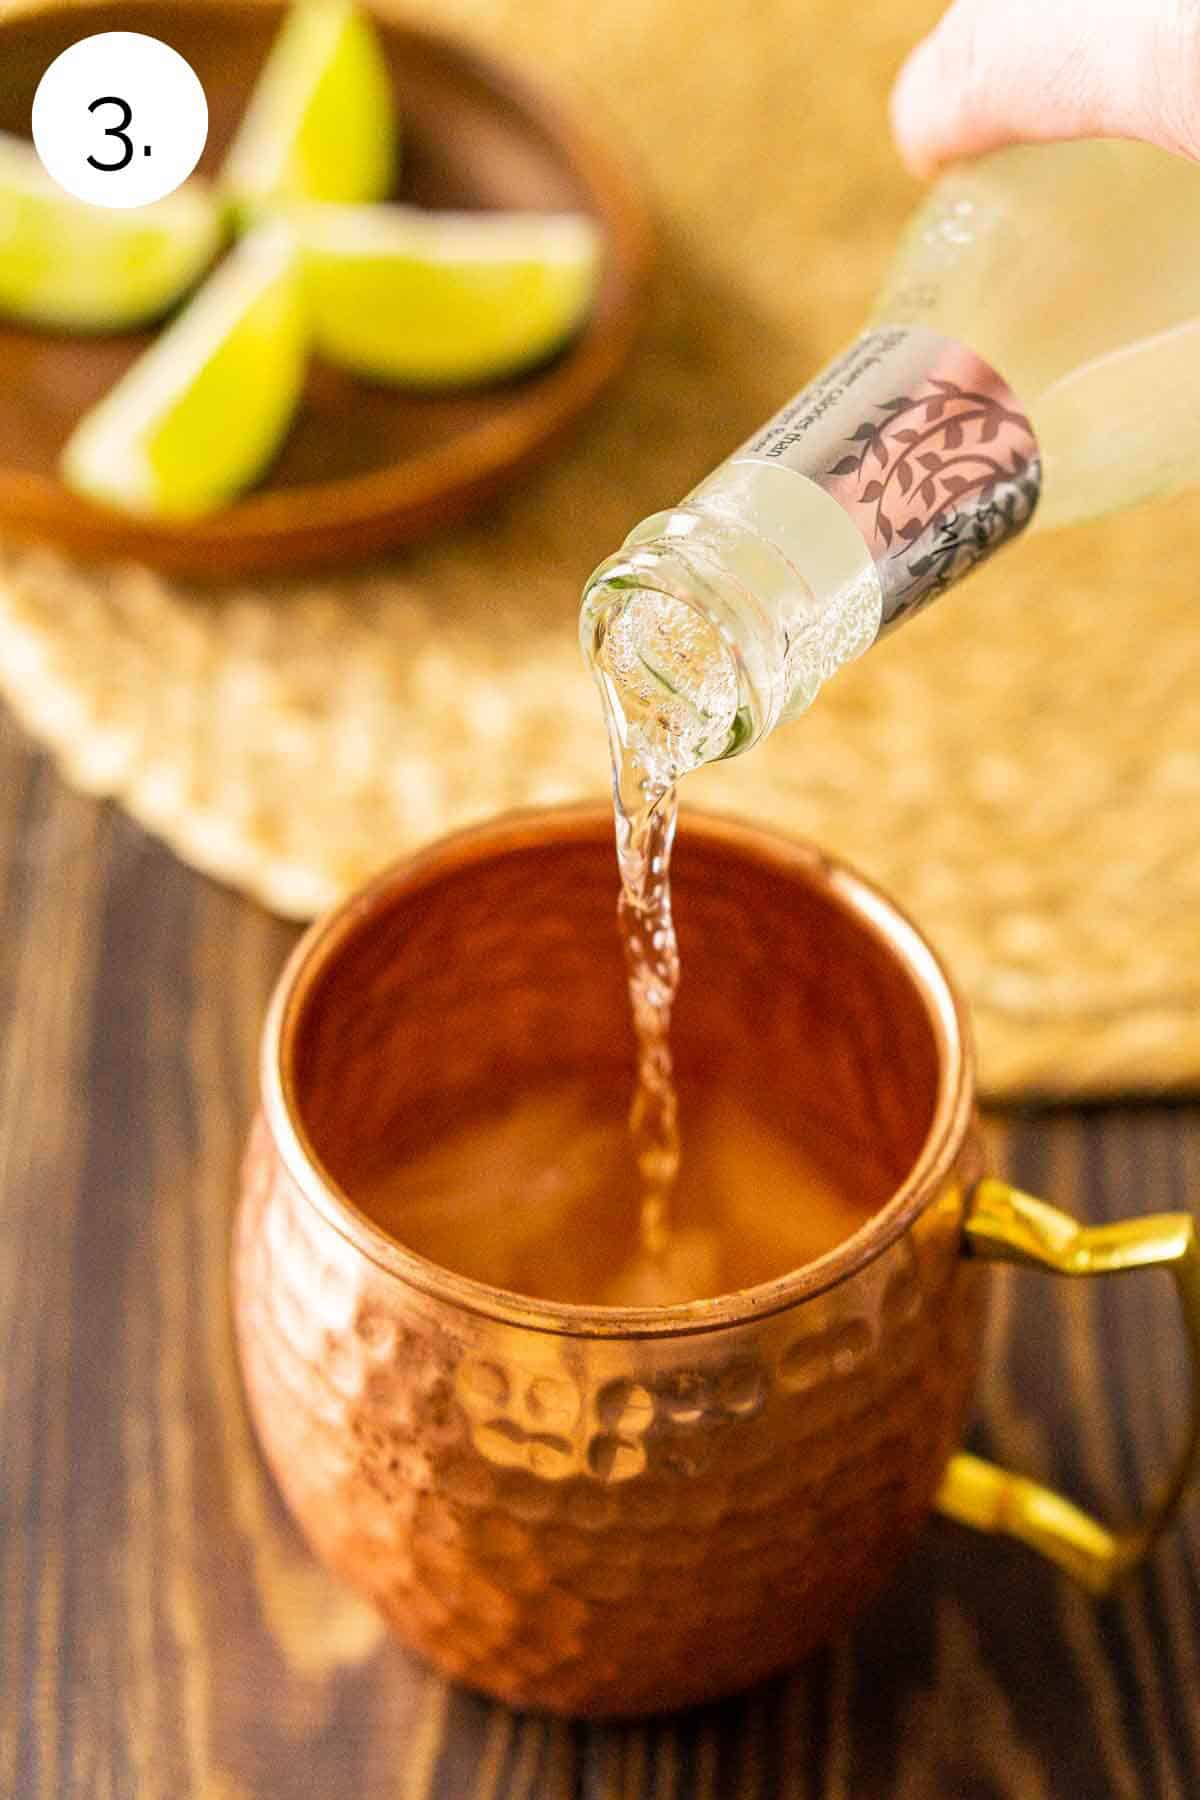 A hand pouring in the ginger beer into the copper mug with the ice and other ingredients on a wooden surface.